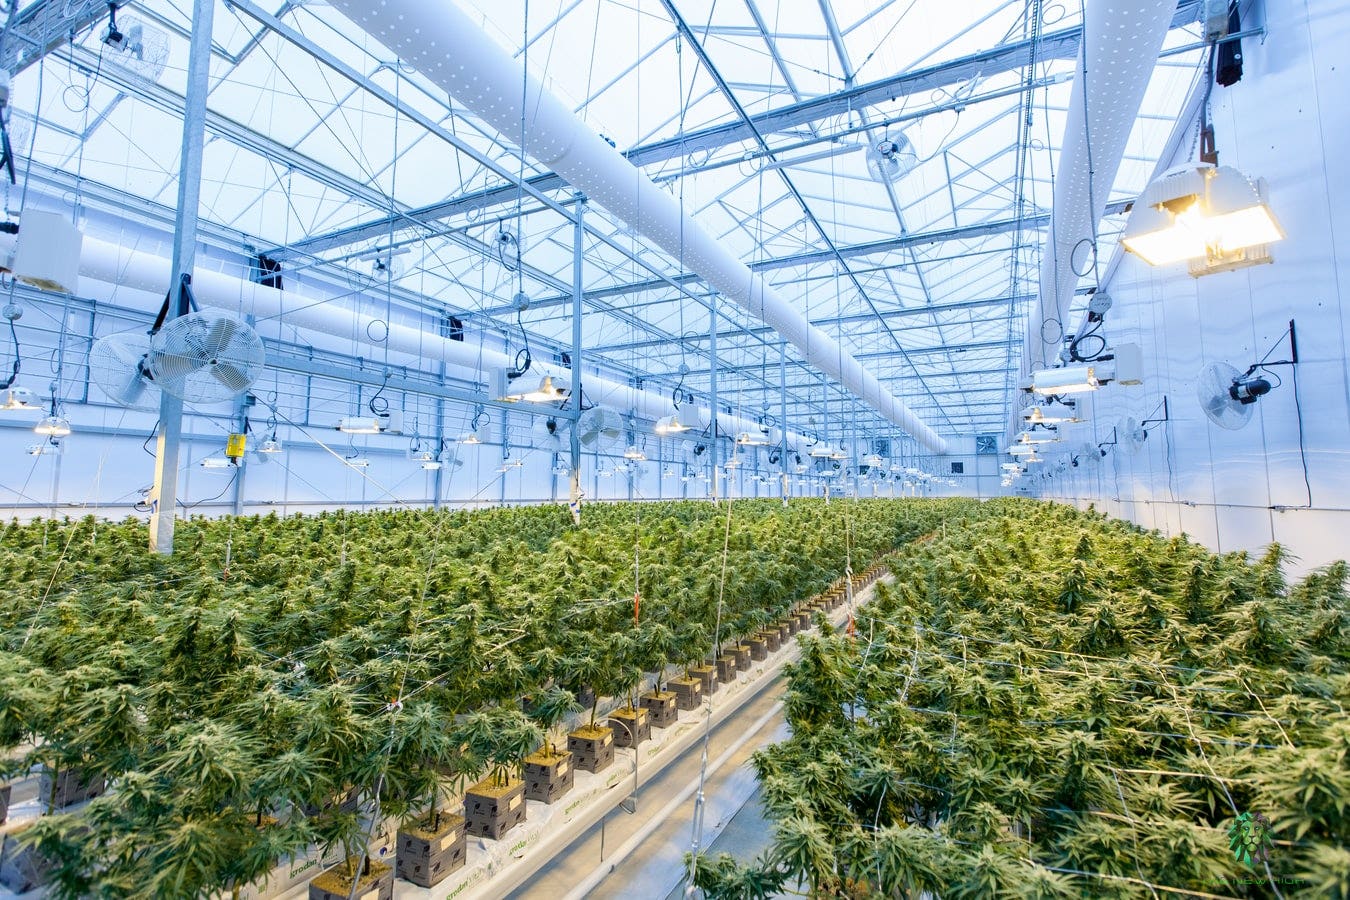 Indoor Vs. Outdoor Cannabis Cultivation: With Commoditization Looming, Outdoor Growing May Be The Future As Industry Scales